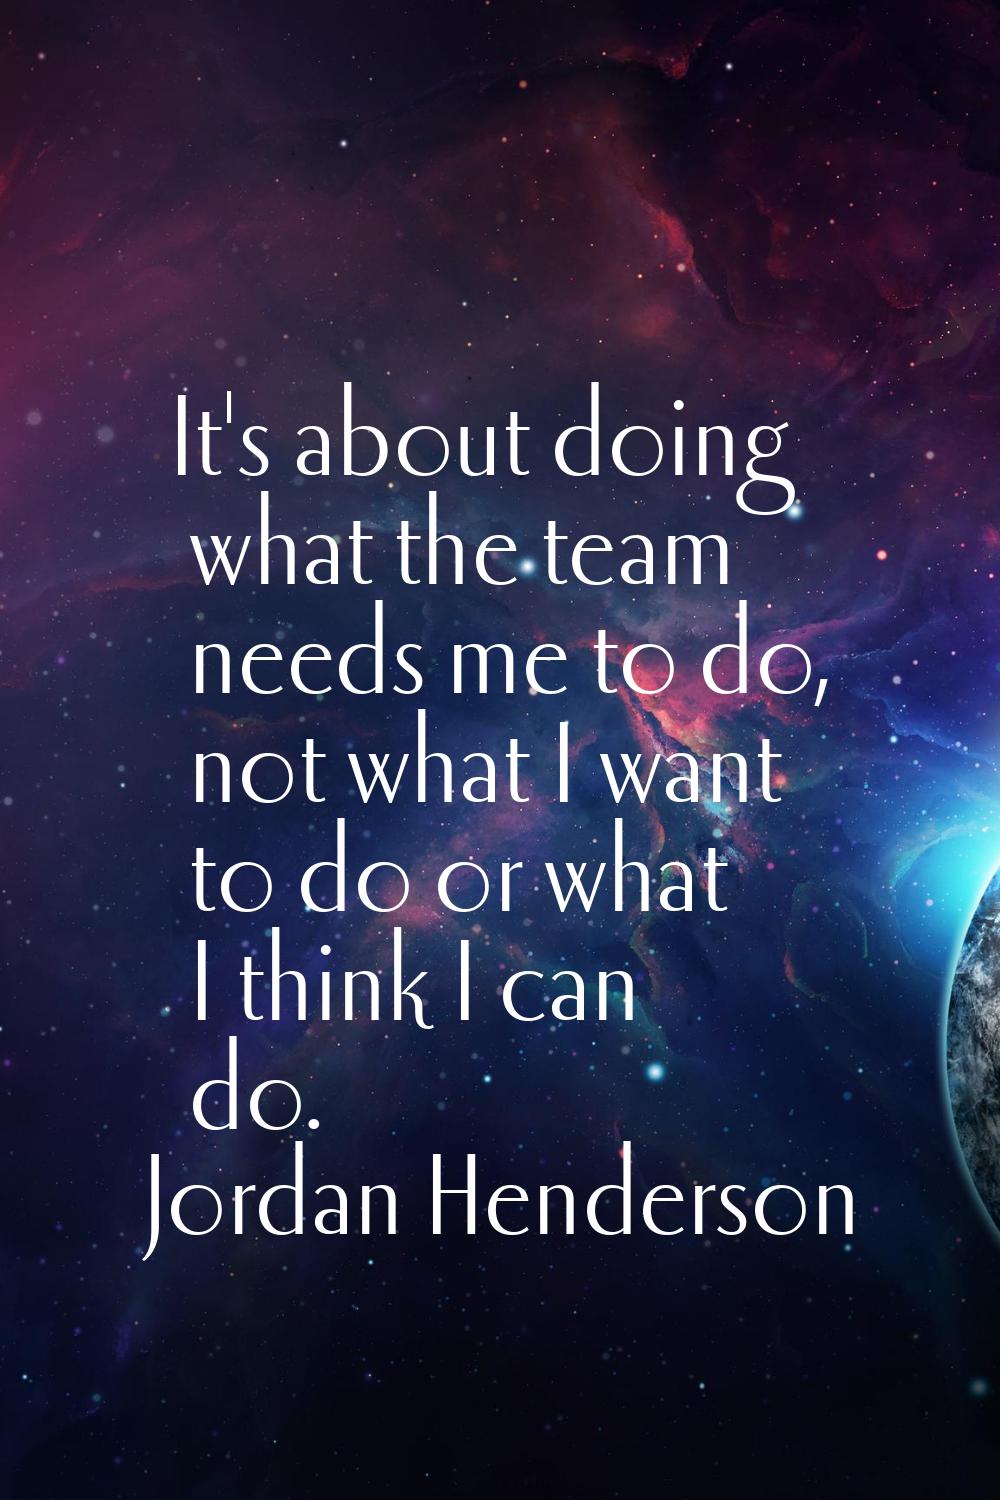 It's about doing what the team needs me to do, not what I want to do or what I think I can do.